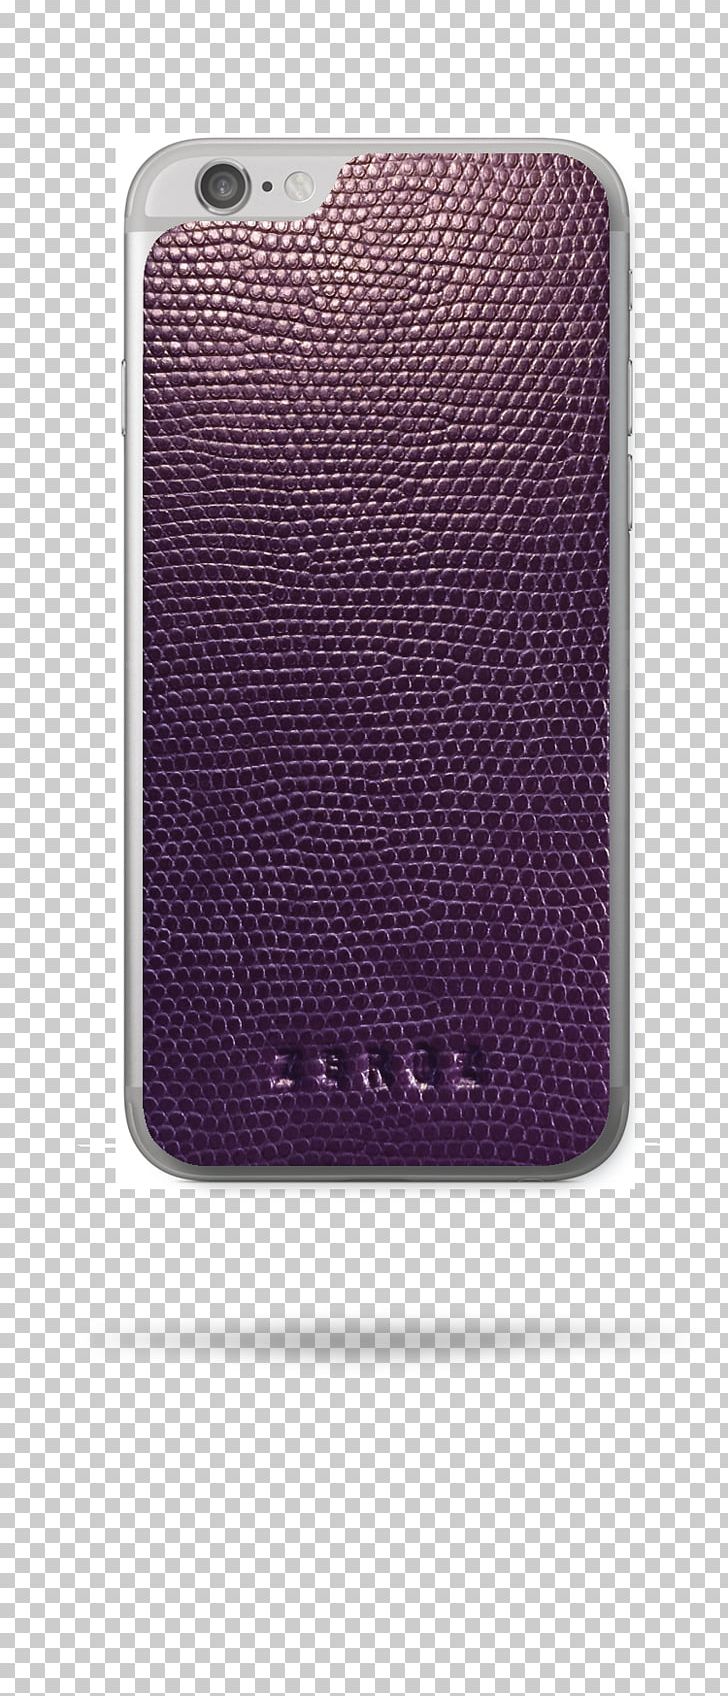 Mobile Phone Accessories Pattern PNG, Clipart, Art, Case, Iphone, Magenta, Mobile Phone Free PNG Download